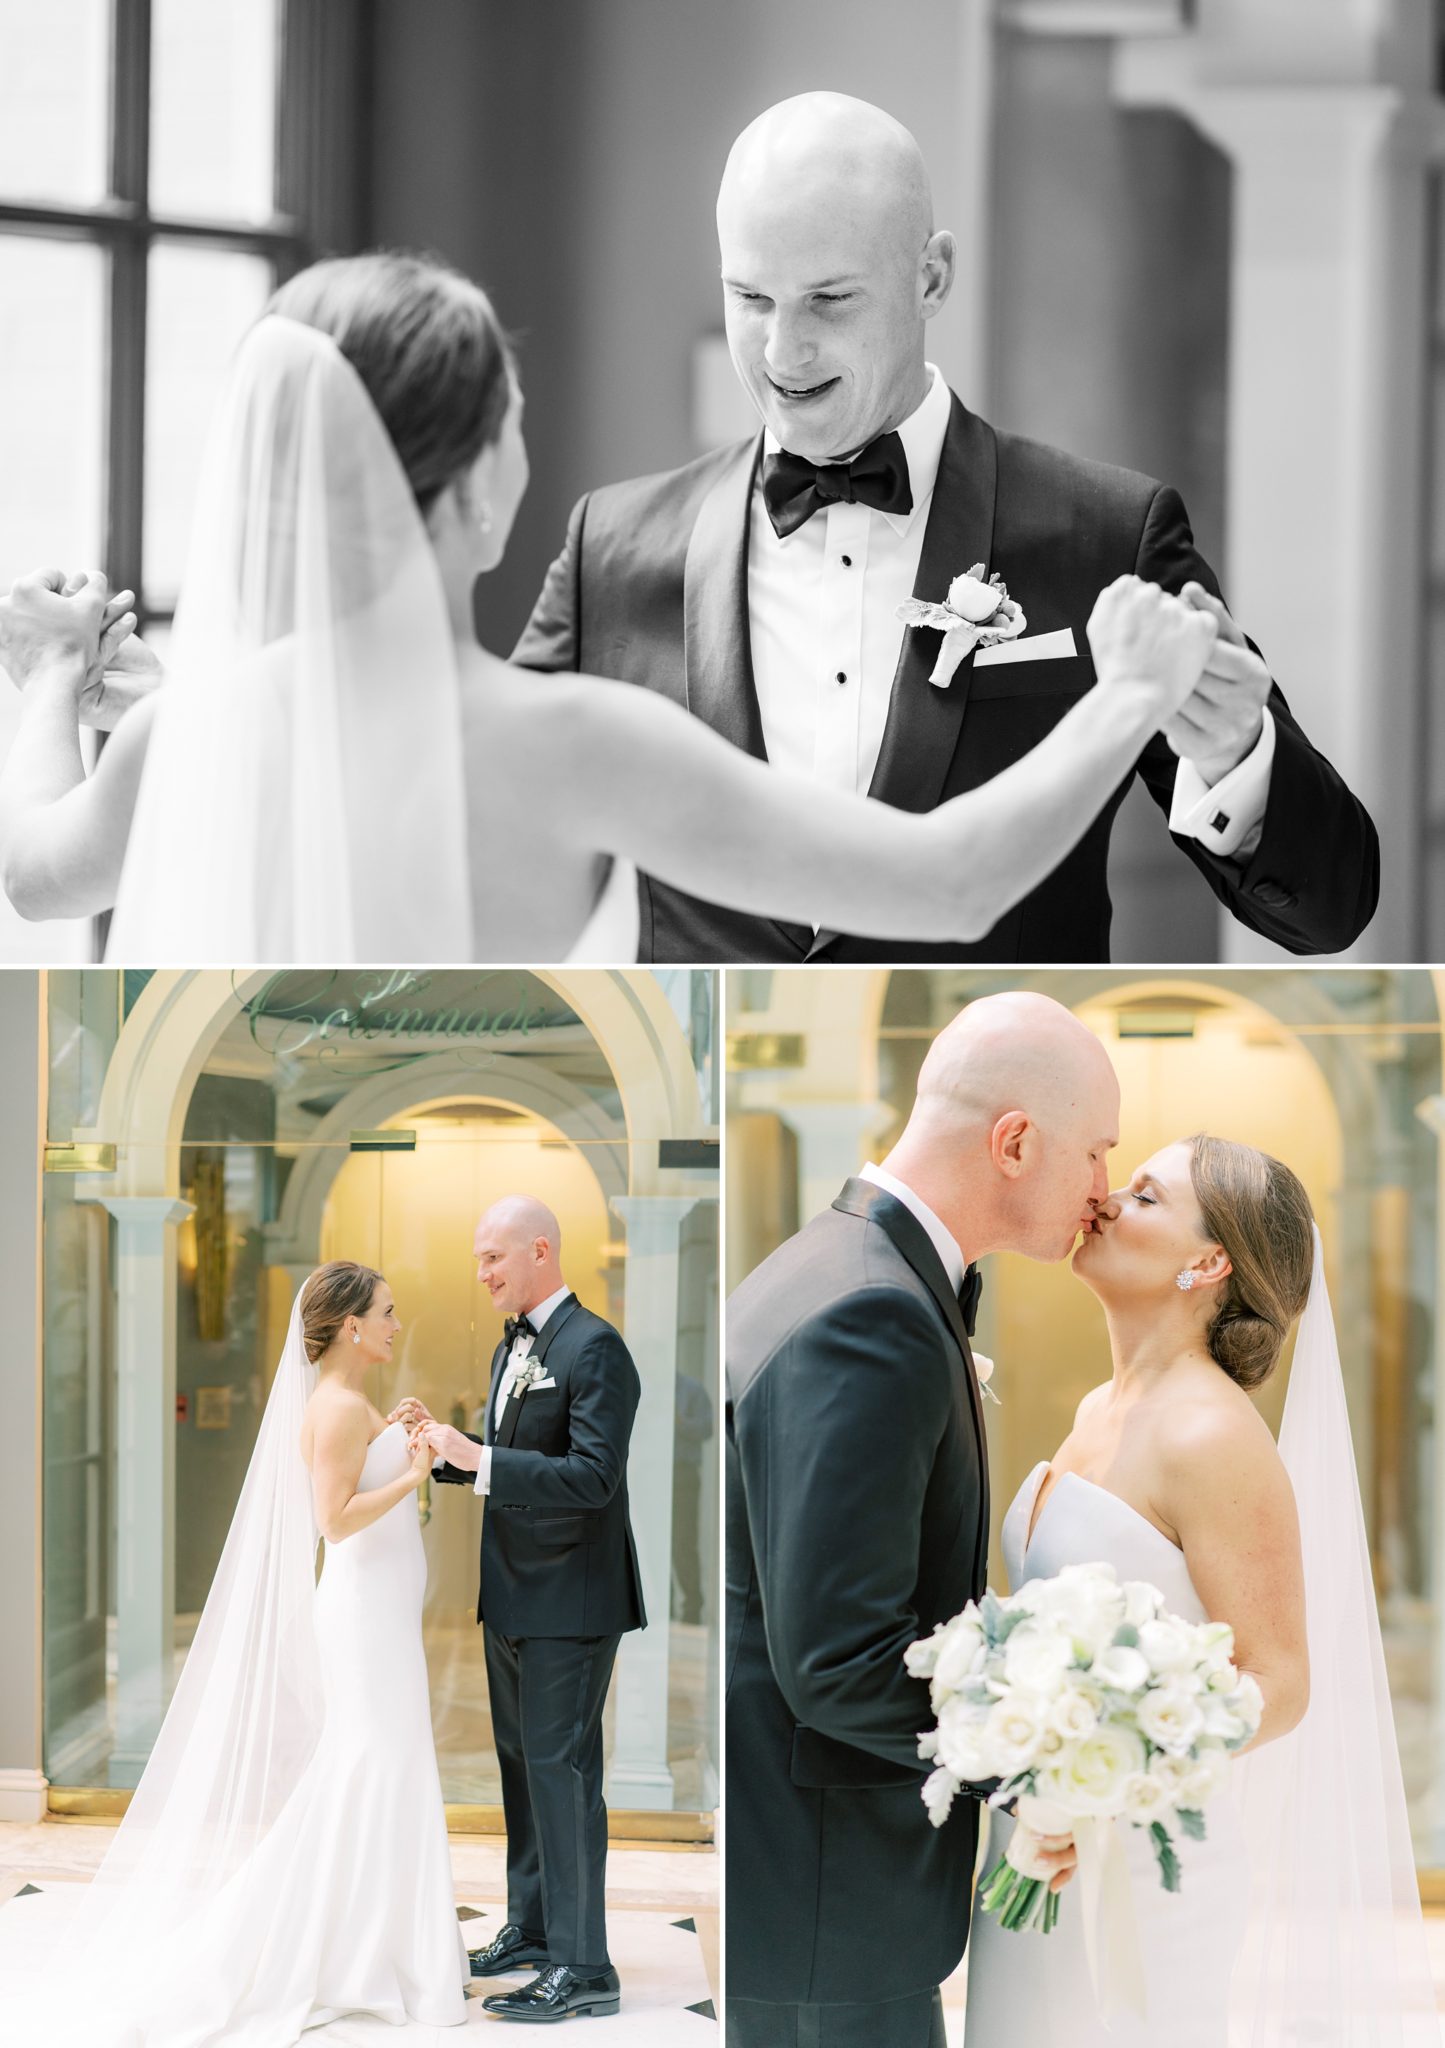 An elegant December wedding at the Fairmont Hotel in Washington, DC designed by EVOKE with florals by Amaryllis.